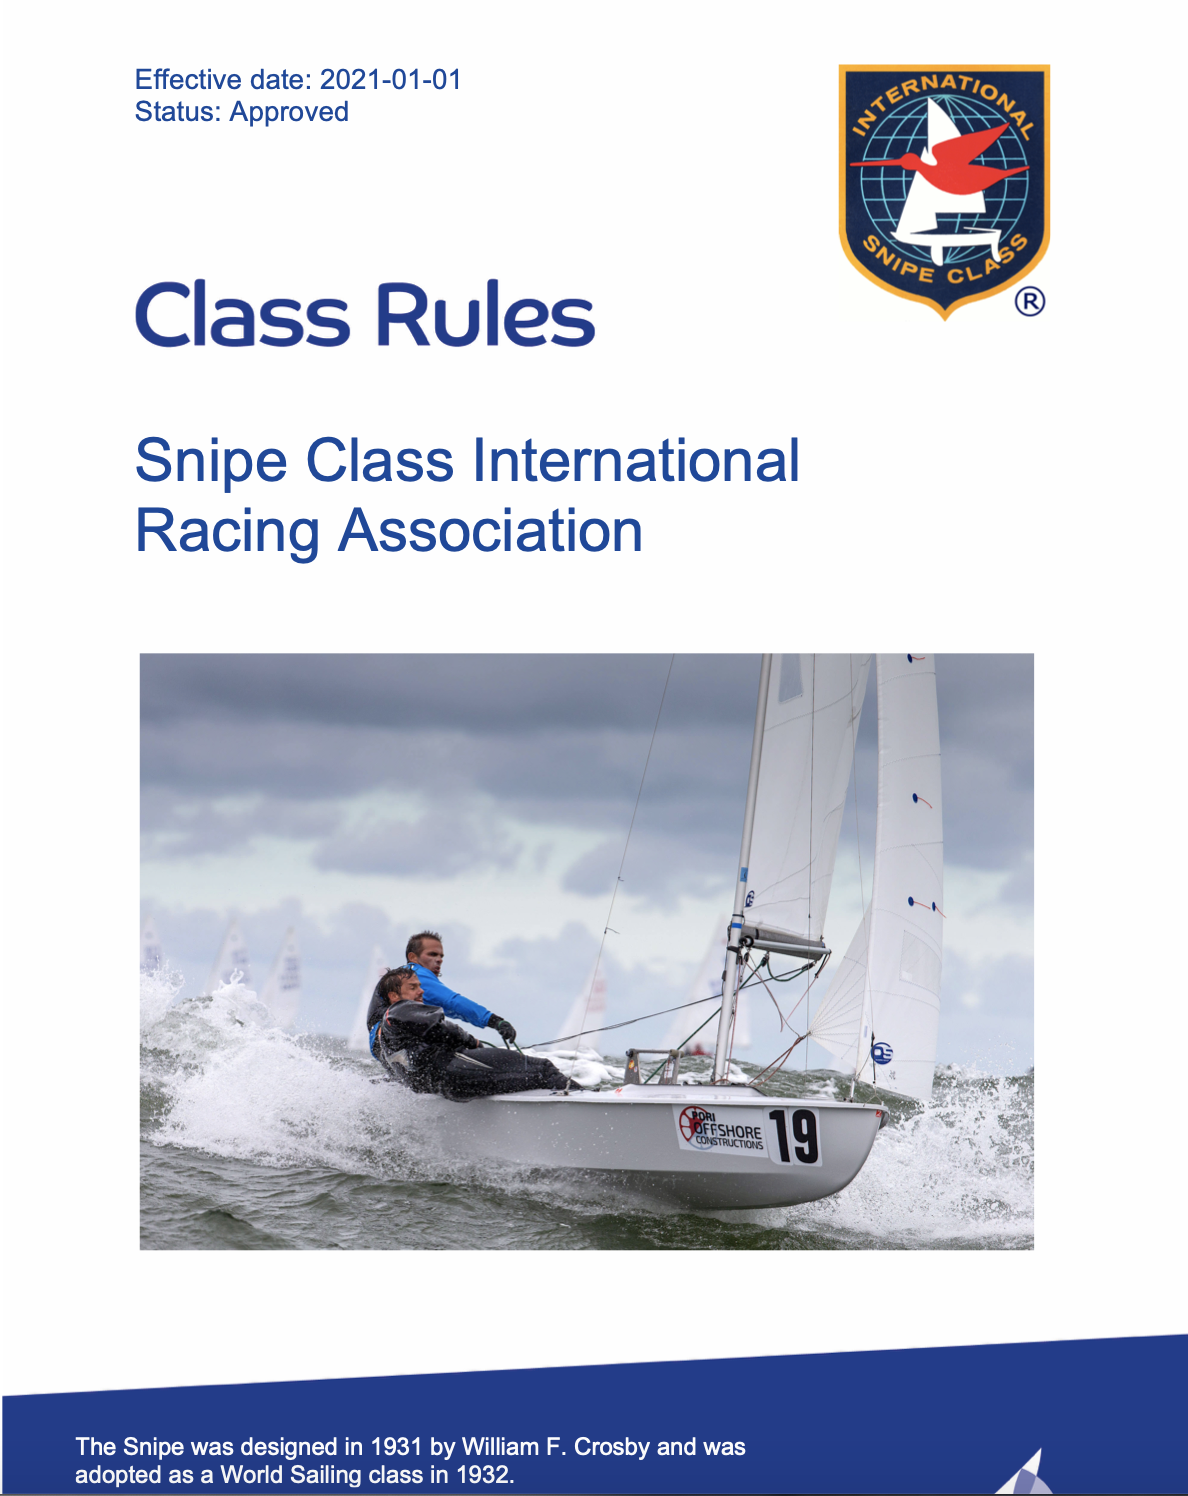 Snipe Class Rules Published on sailing.org Image